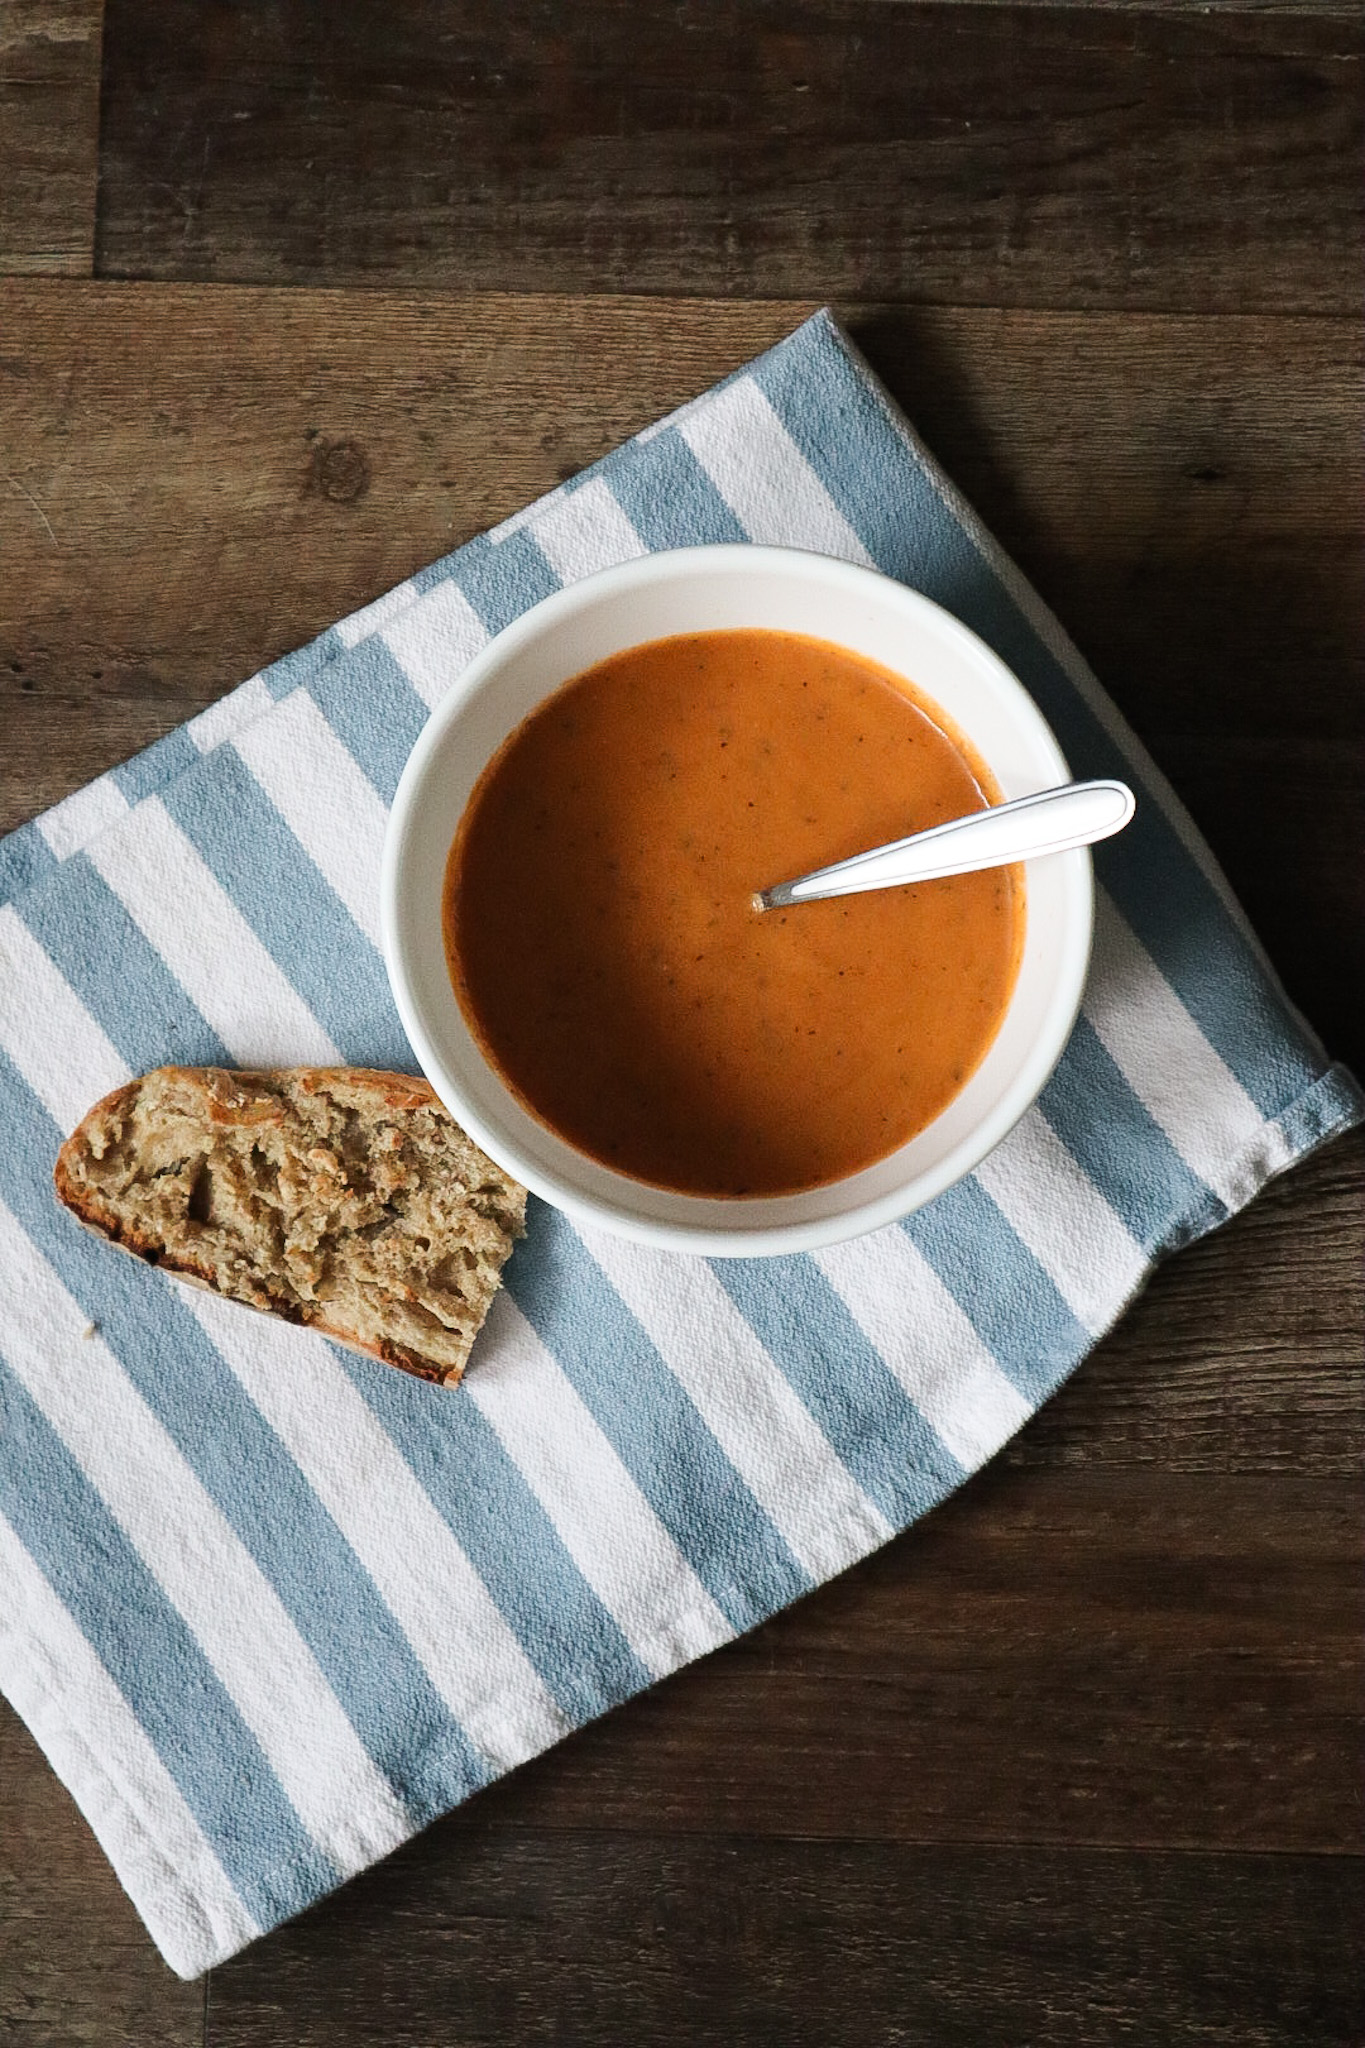 tomato soup paired with a slice of bread on a striped towel